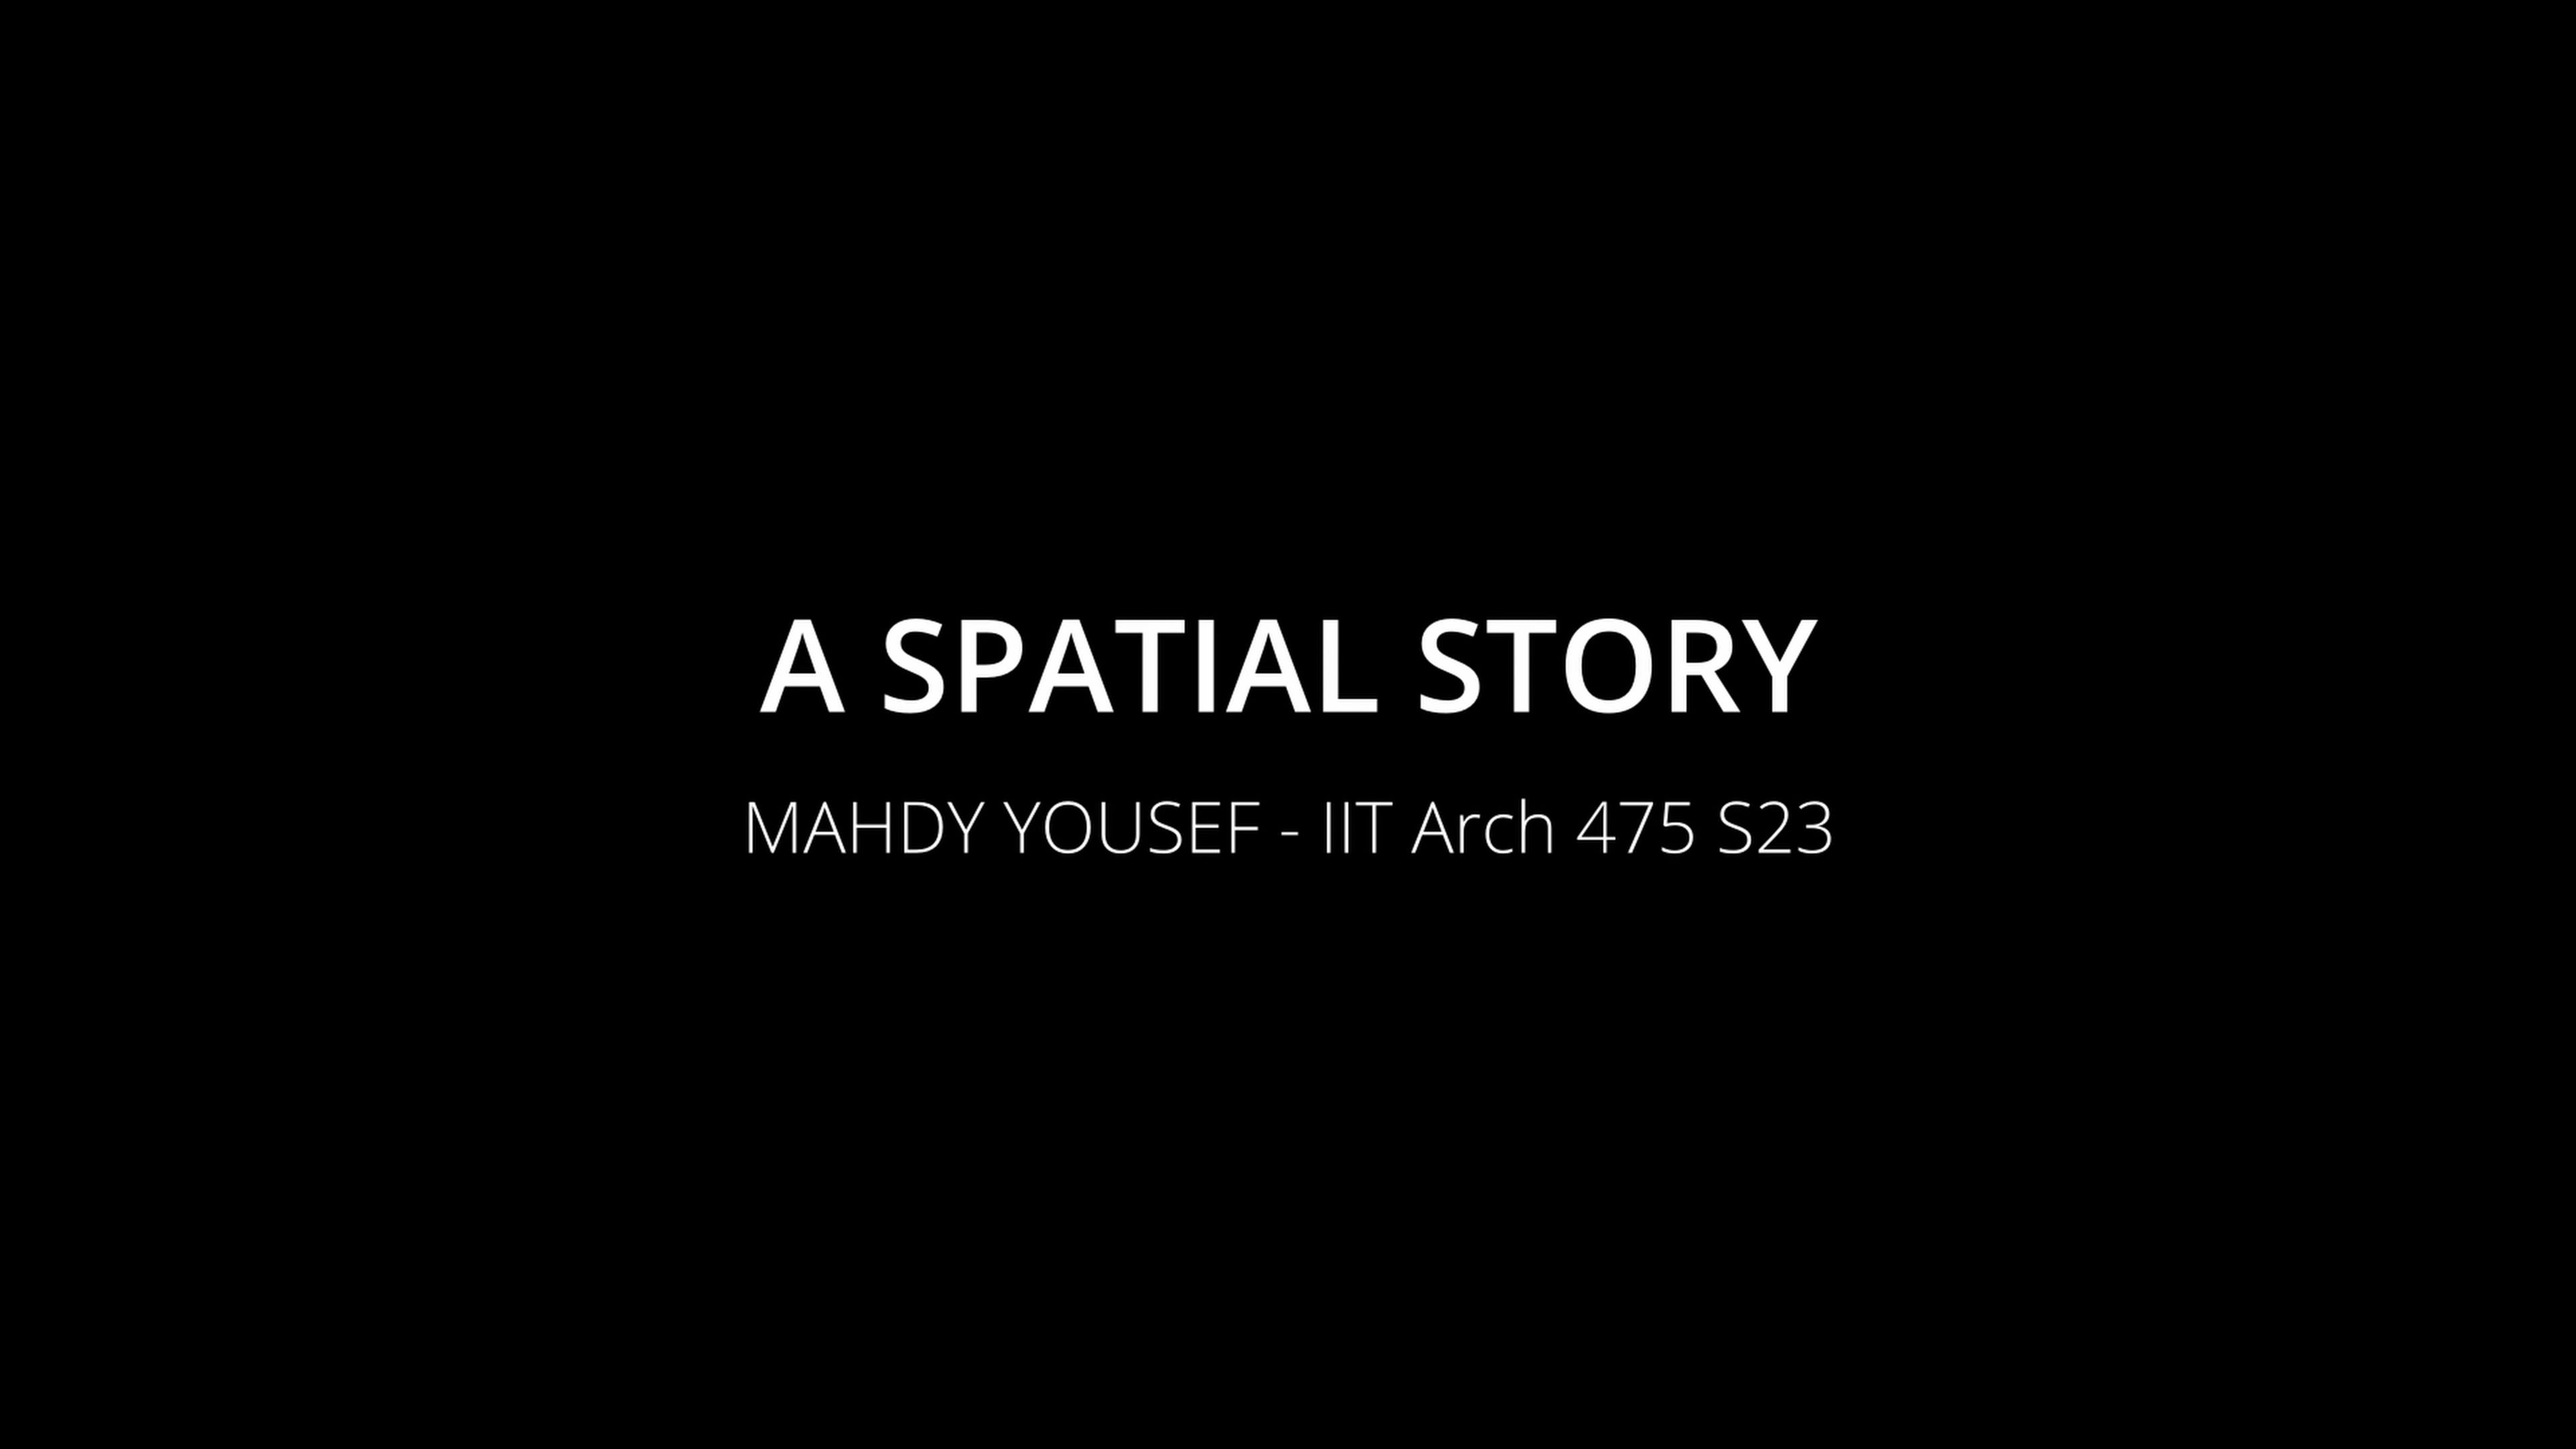 This is "SPRING_ARCH475_JONATHAN-MILLER_Mahdy-Yousef" by Jeffrey Wigen on Vimeo, the home for high quality videos and the people who love them.